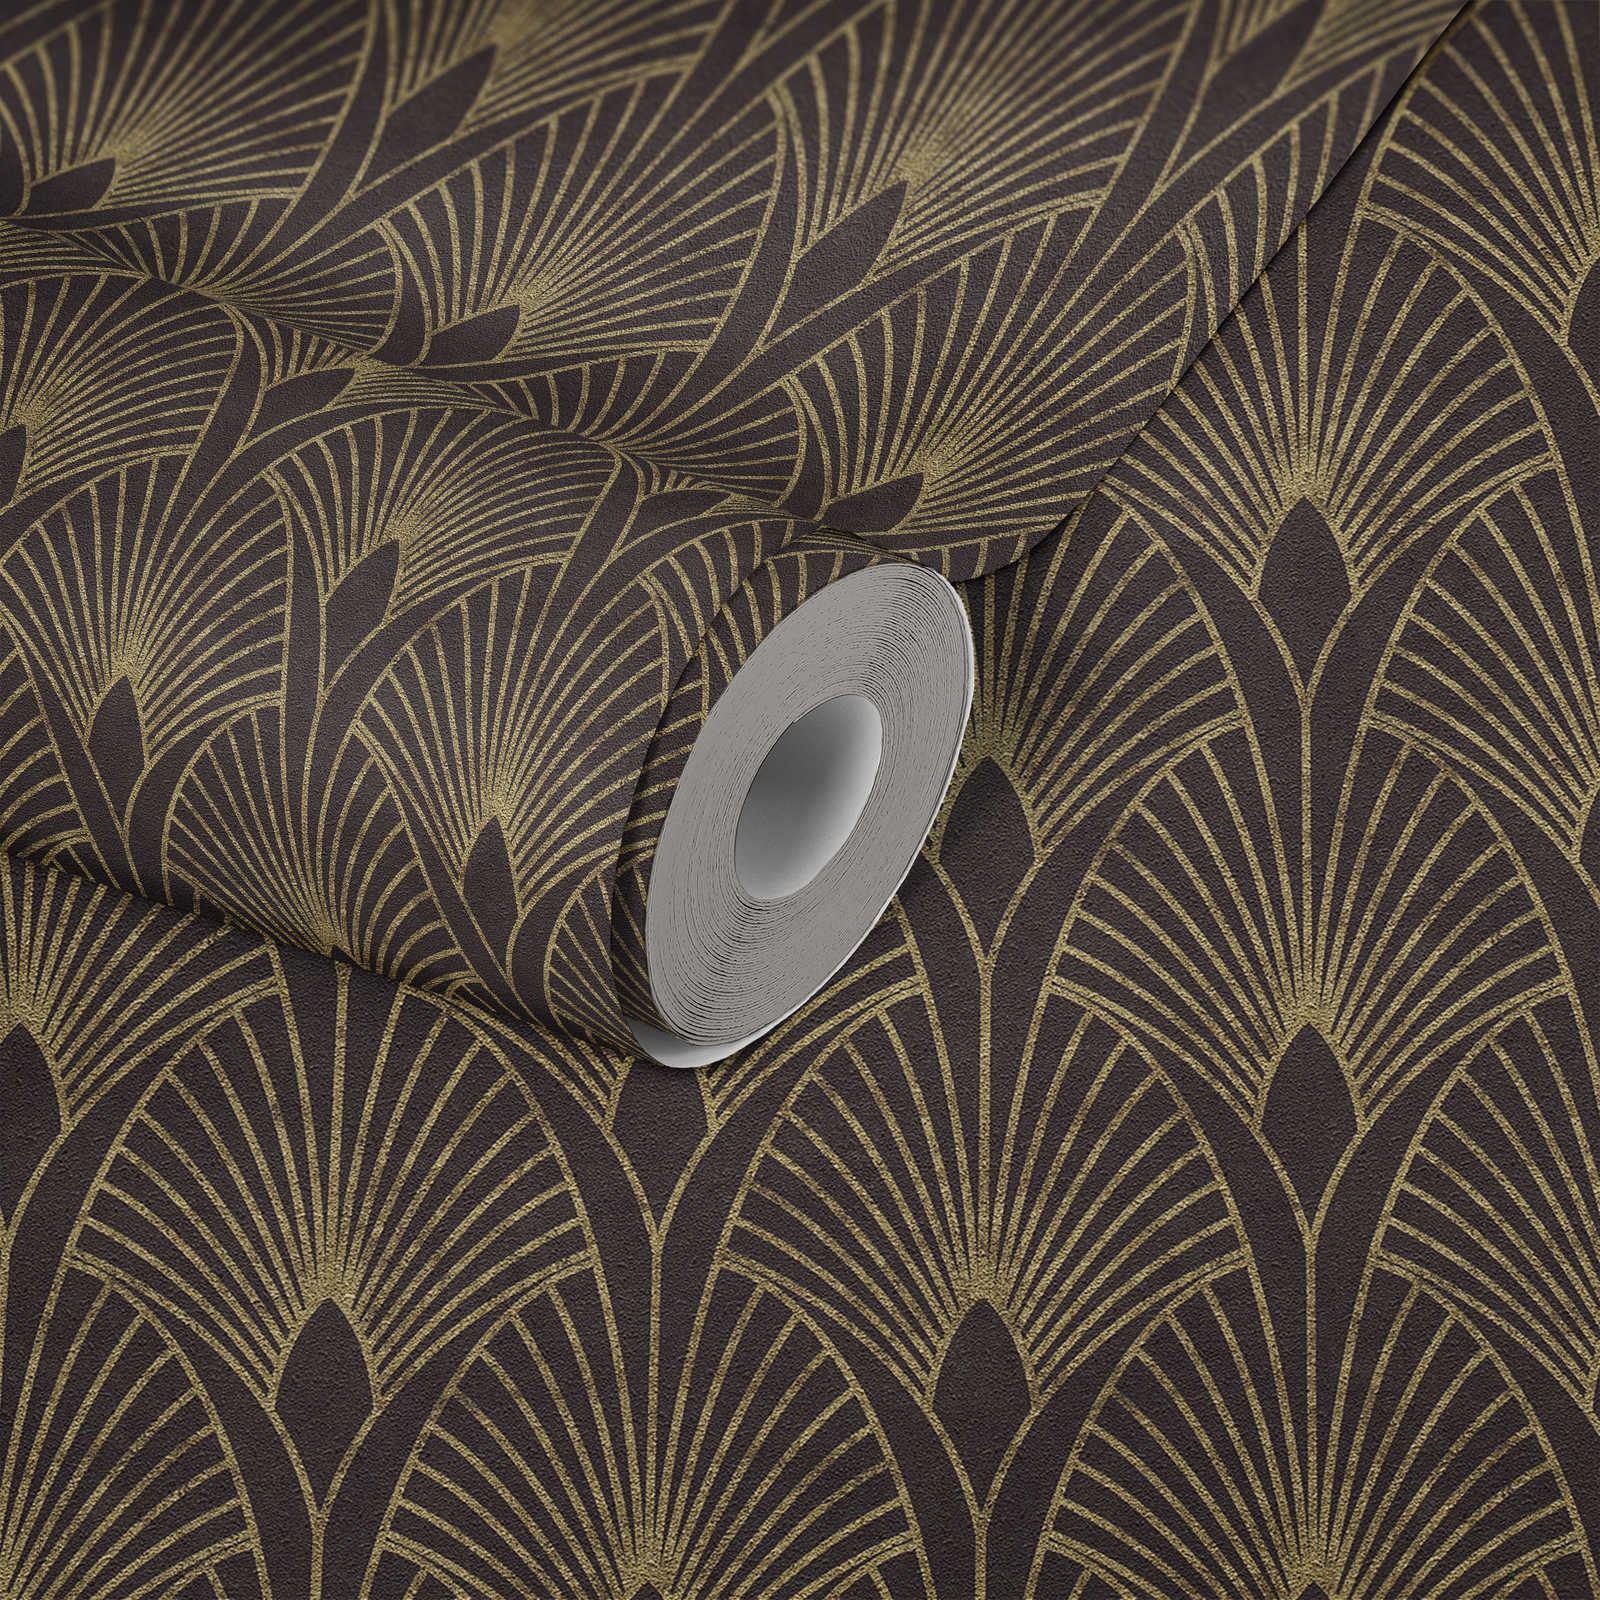             Art deco wallpaper with gold accents - black, gold
        